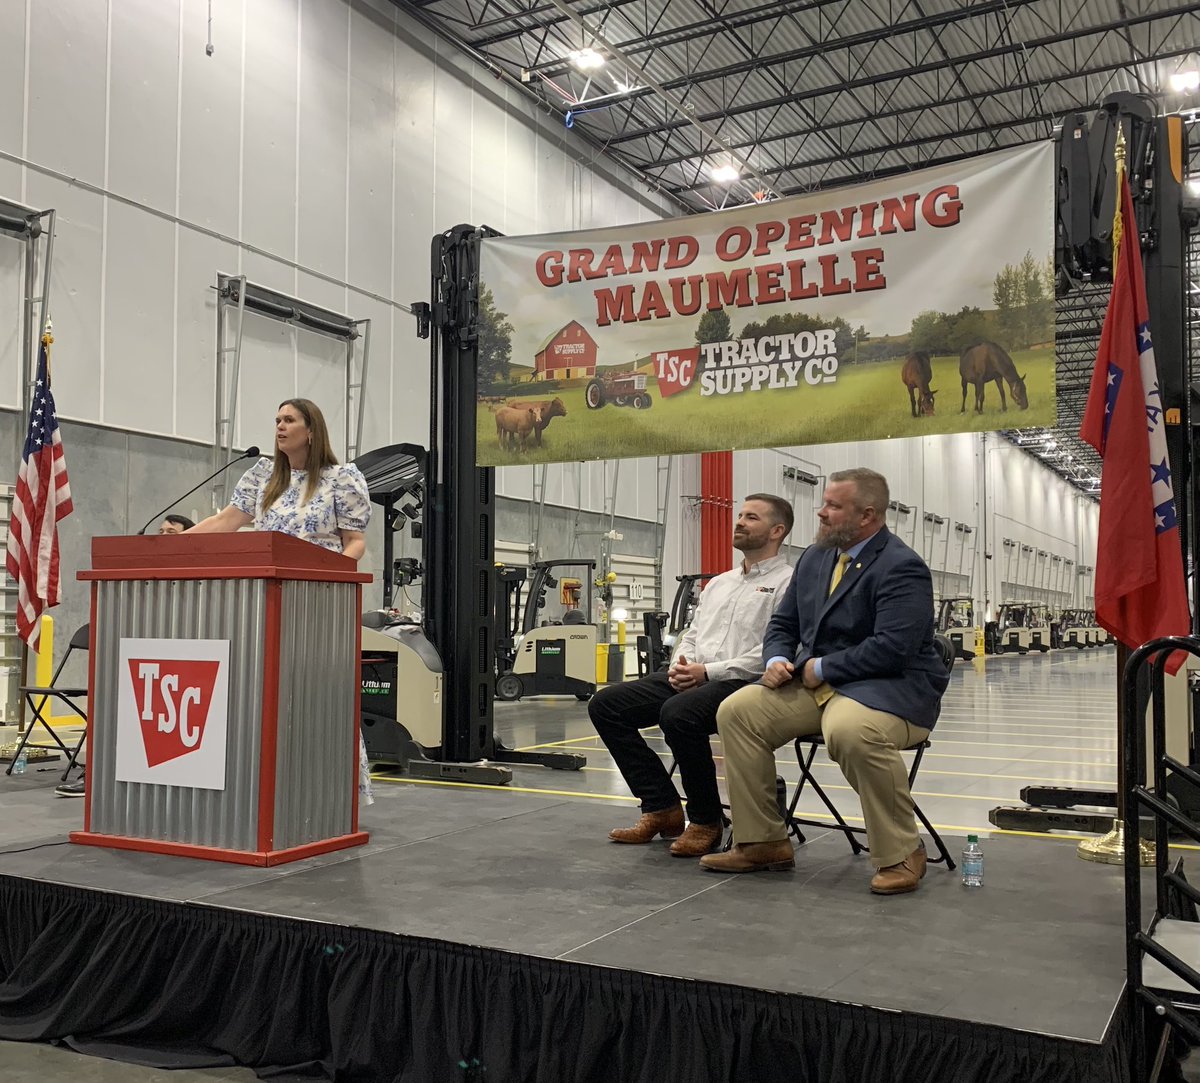 You can’t help but be impressed by this group of future leaders! Great to see @ArkansasFFA and @Arkansas4H today at the huge @TractorSupply announcement with Gov @SarahHuckabee !